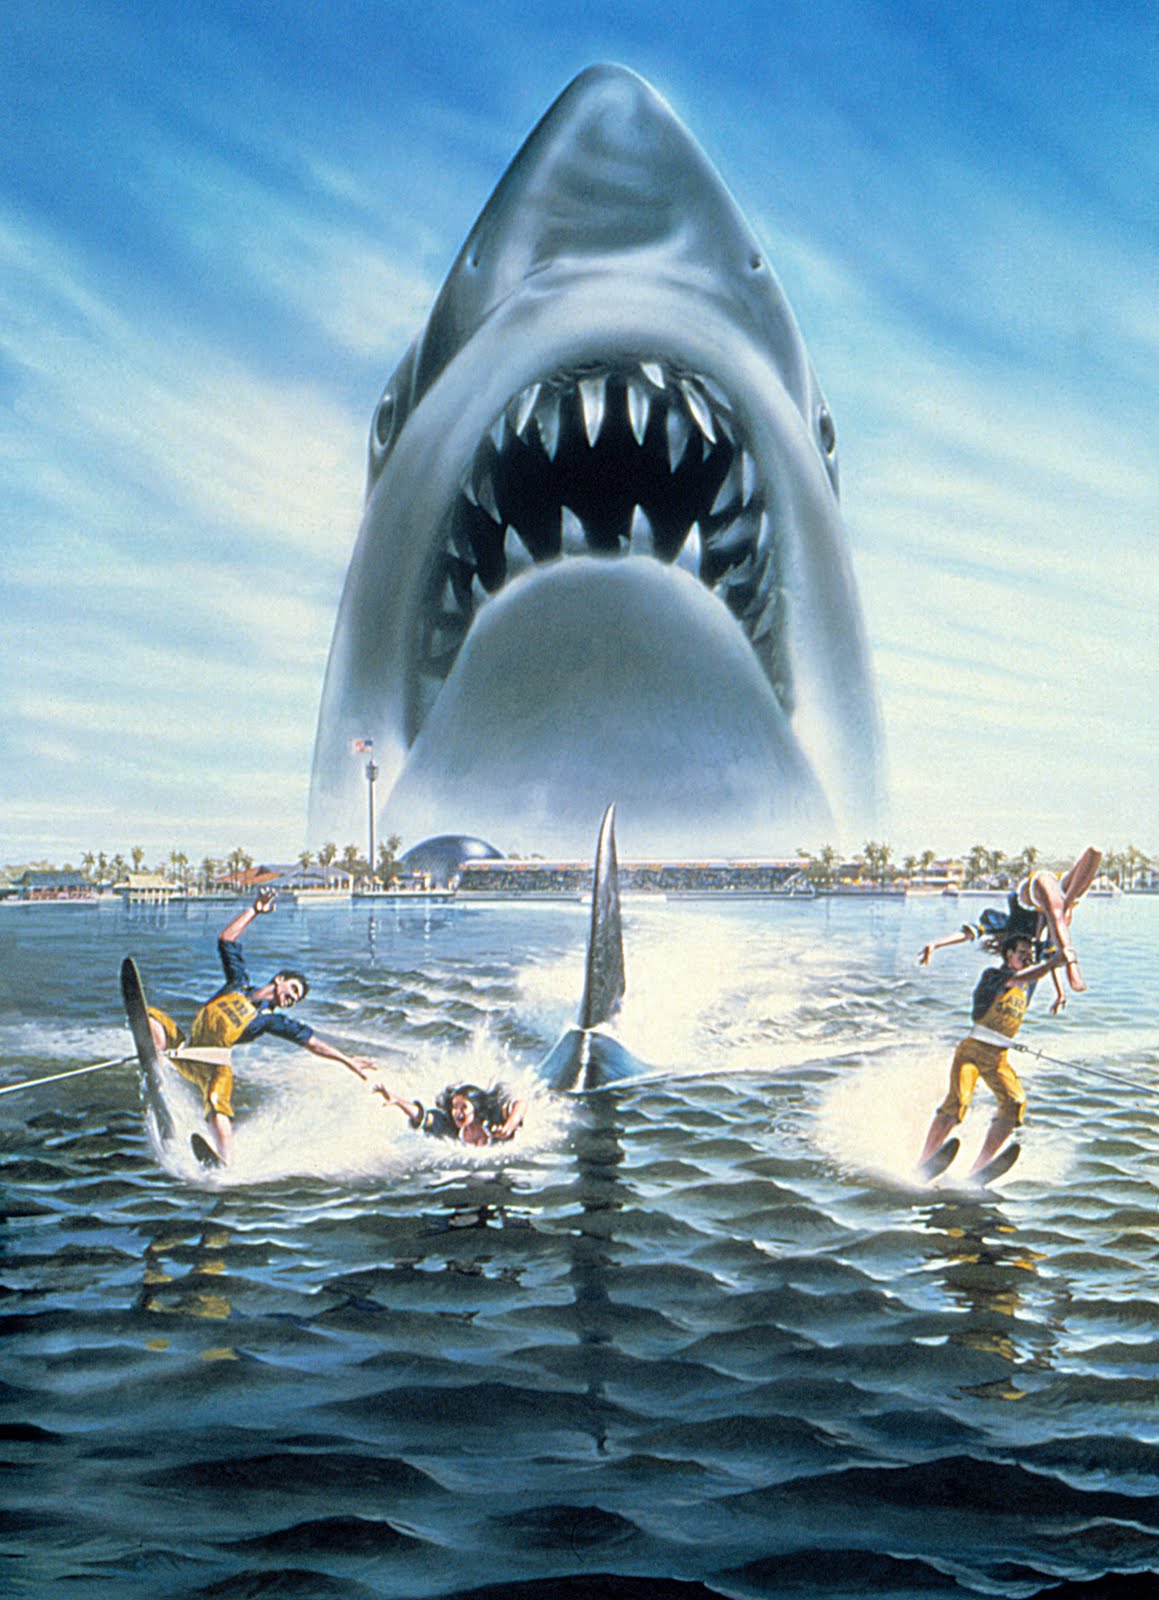 Jaws 23293 Hd Wallpapers in Movies   Imagescicom 1159x1600